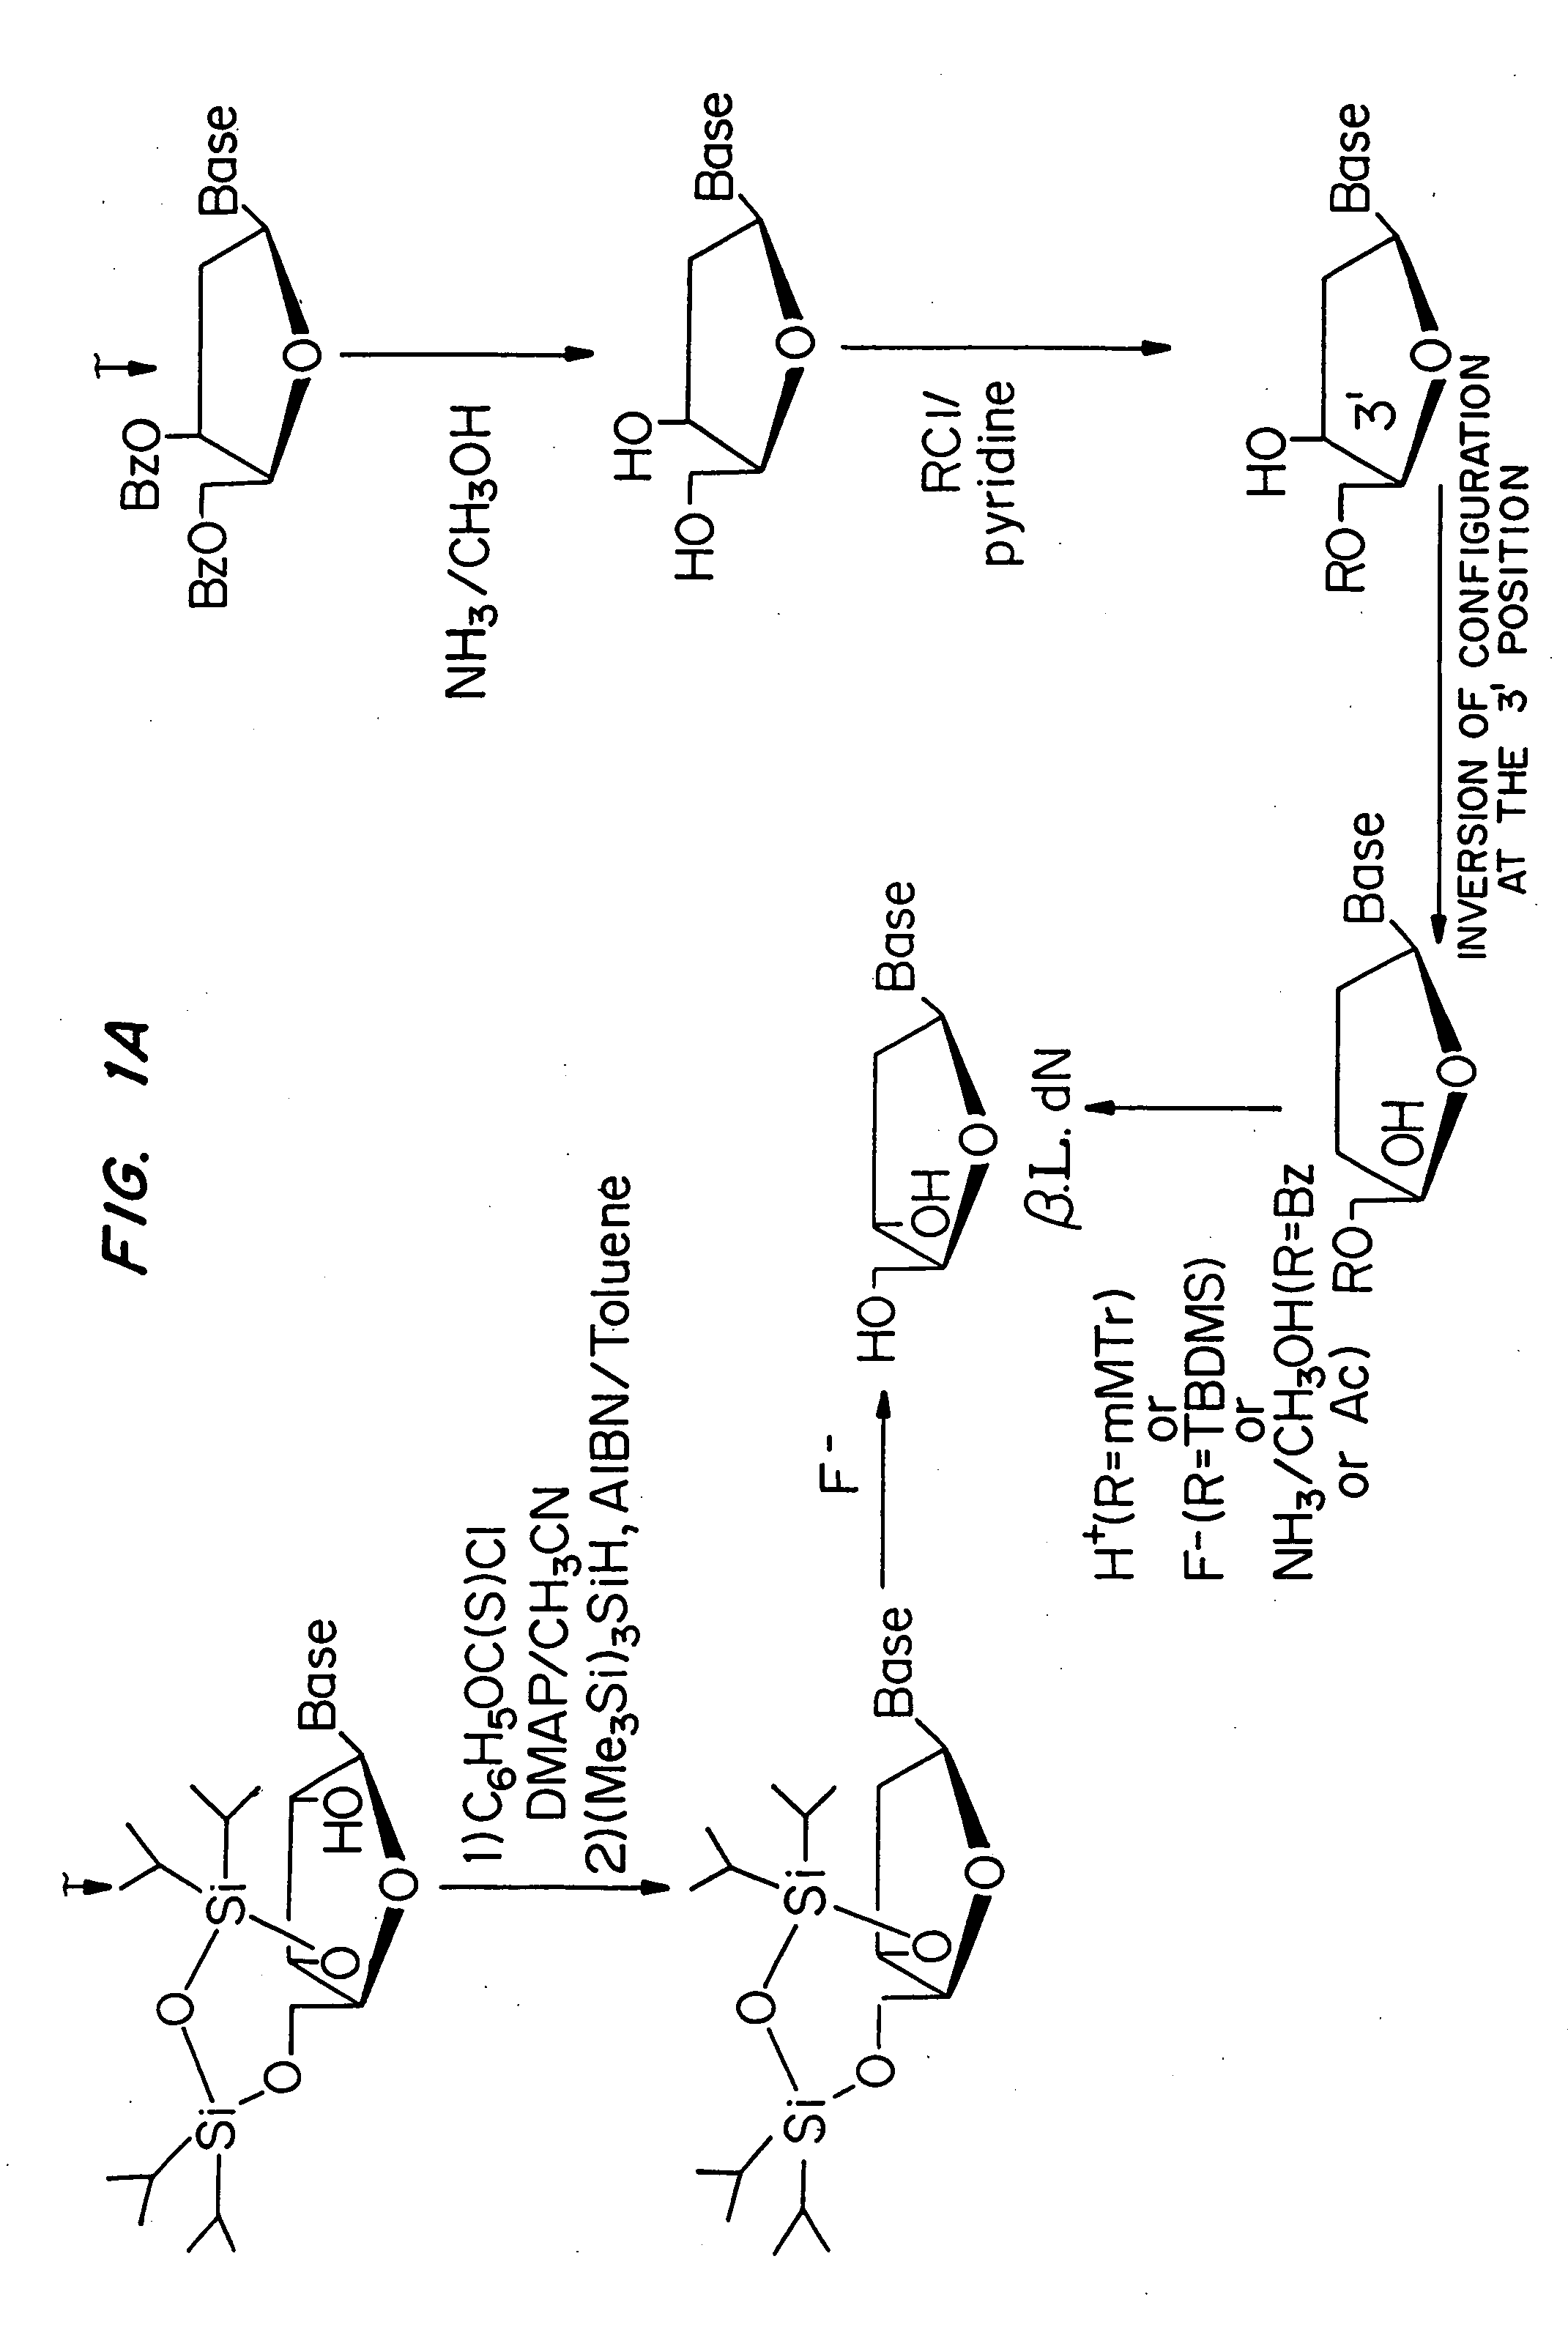 Beta-L-2'-deoxy-nucleosides for the treatment of hepatitis B